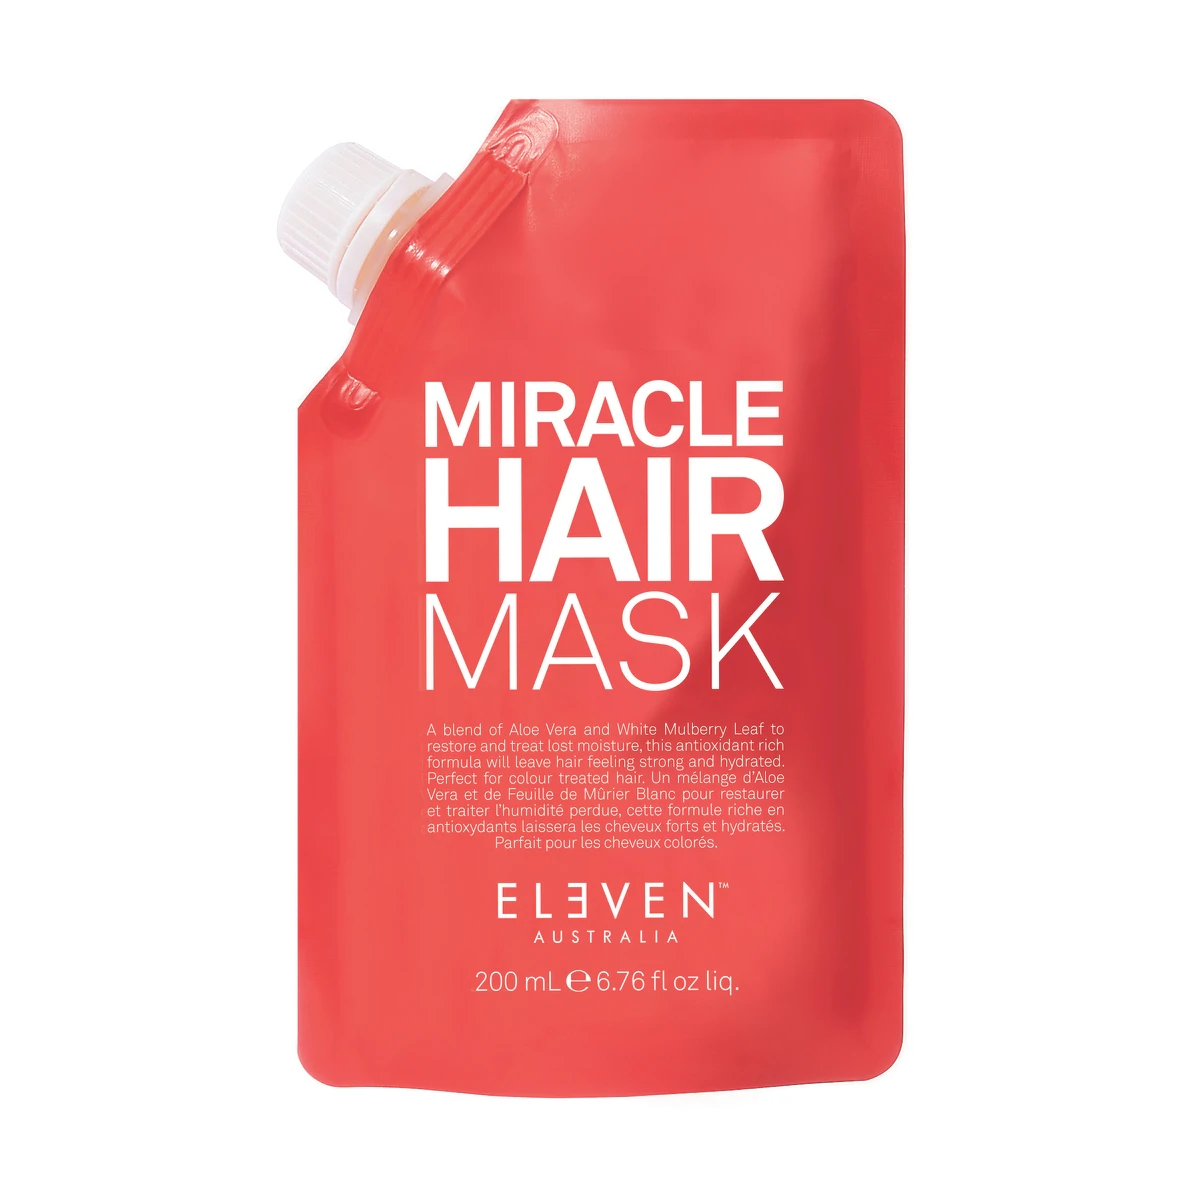 2.ELEVEN Miracle Hair Mask €22,